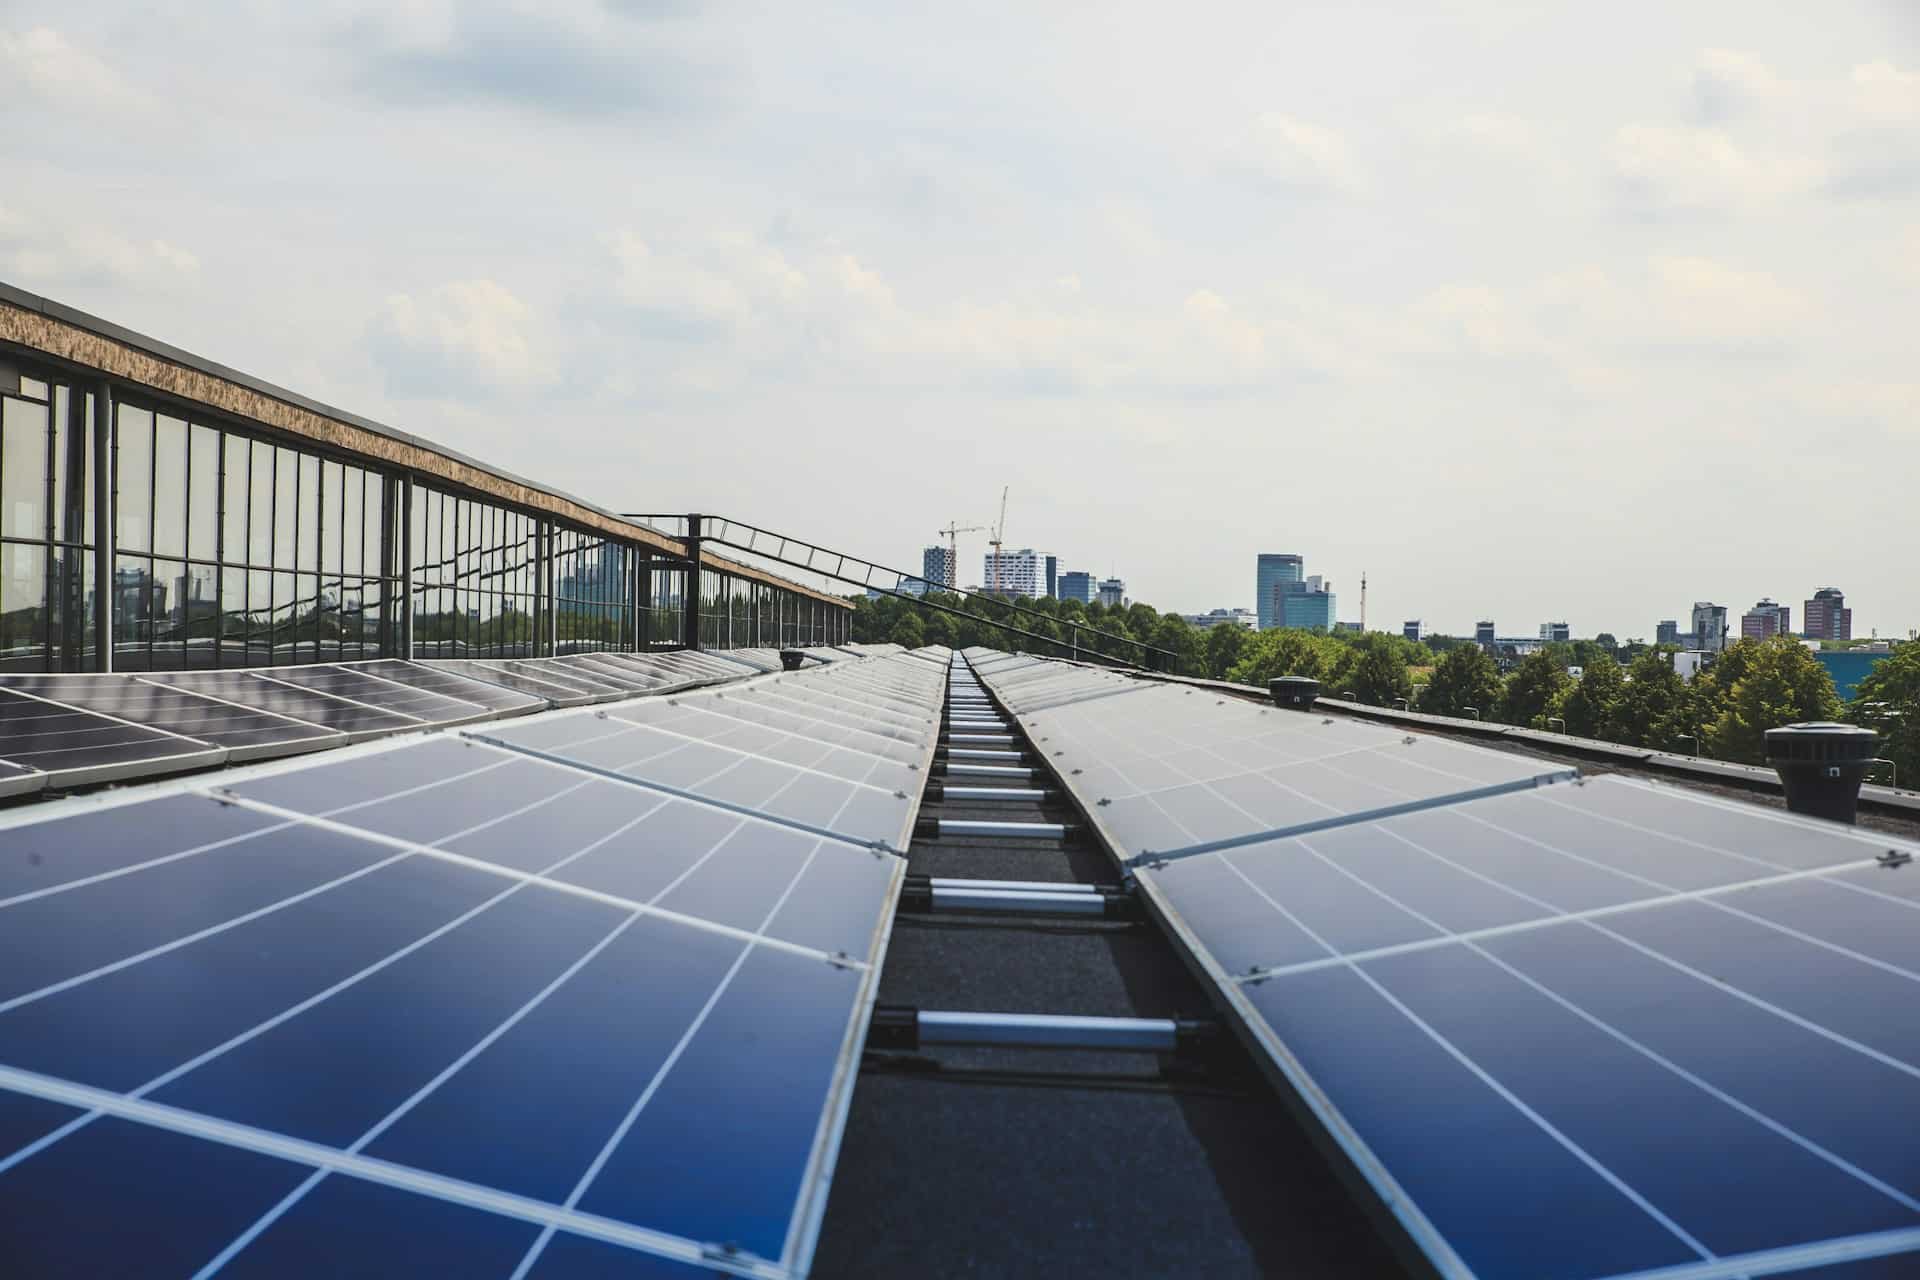 4 Solar Panel Types You Should Know About Before You Buy